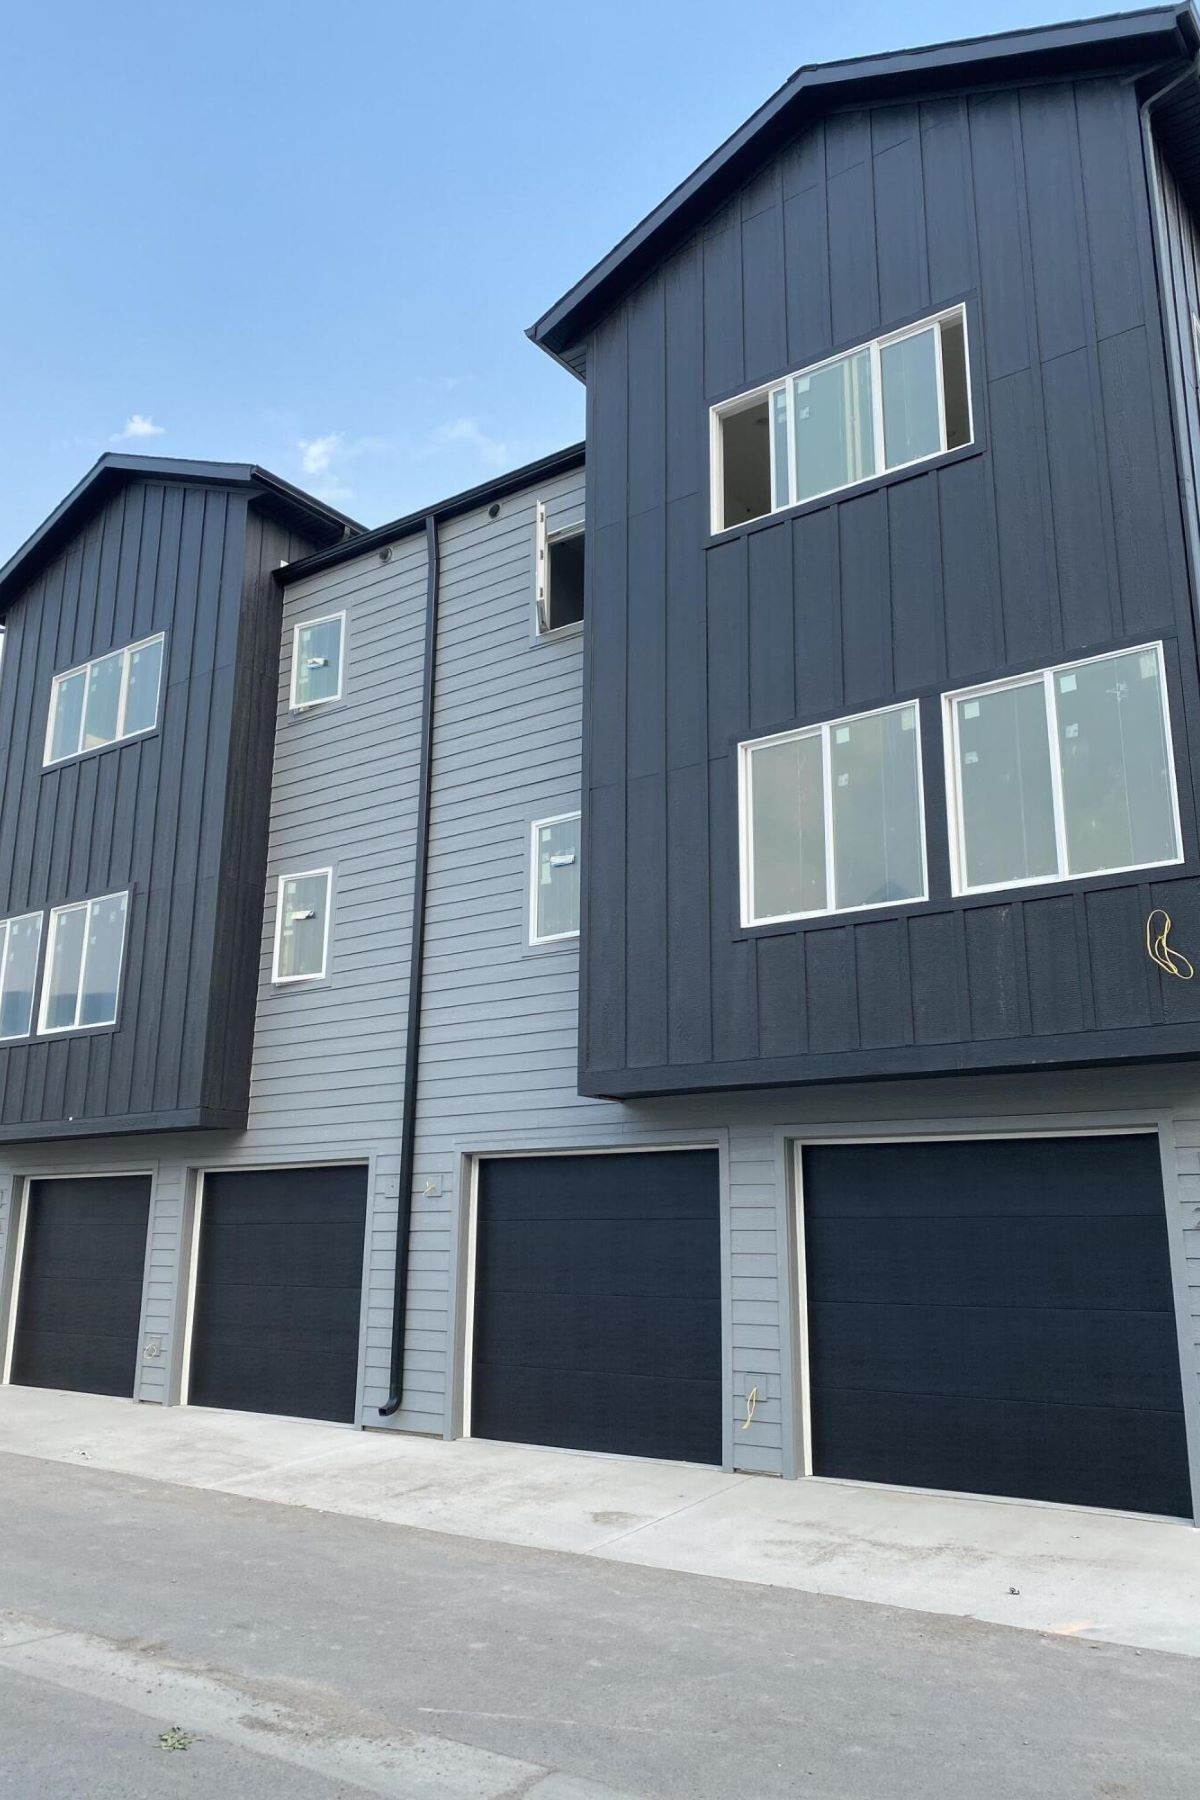 8. Condominiums for Sale at 2318 A Mary Jane Boulevard, Missoula, Montana 59808 United States